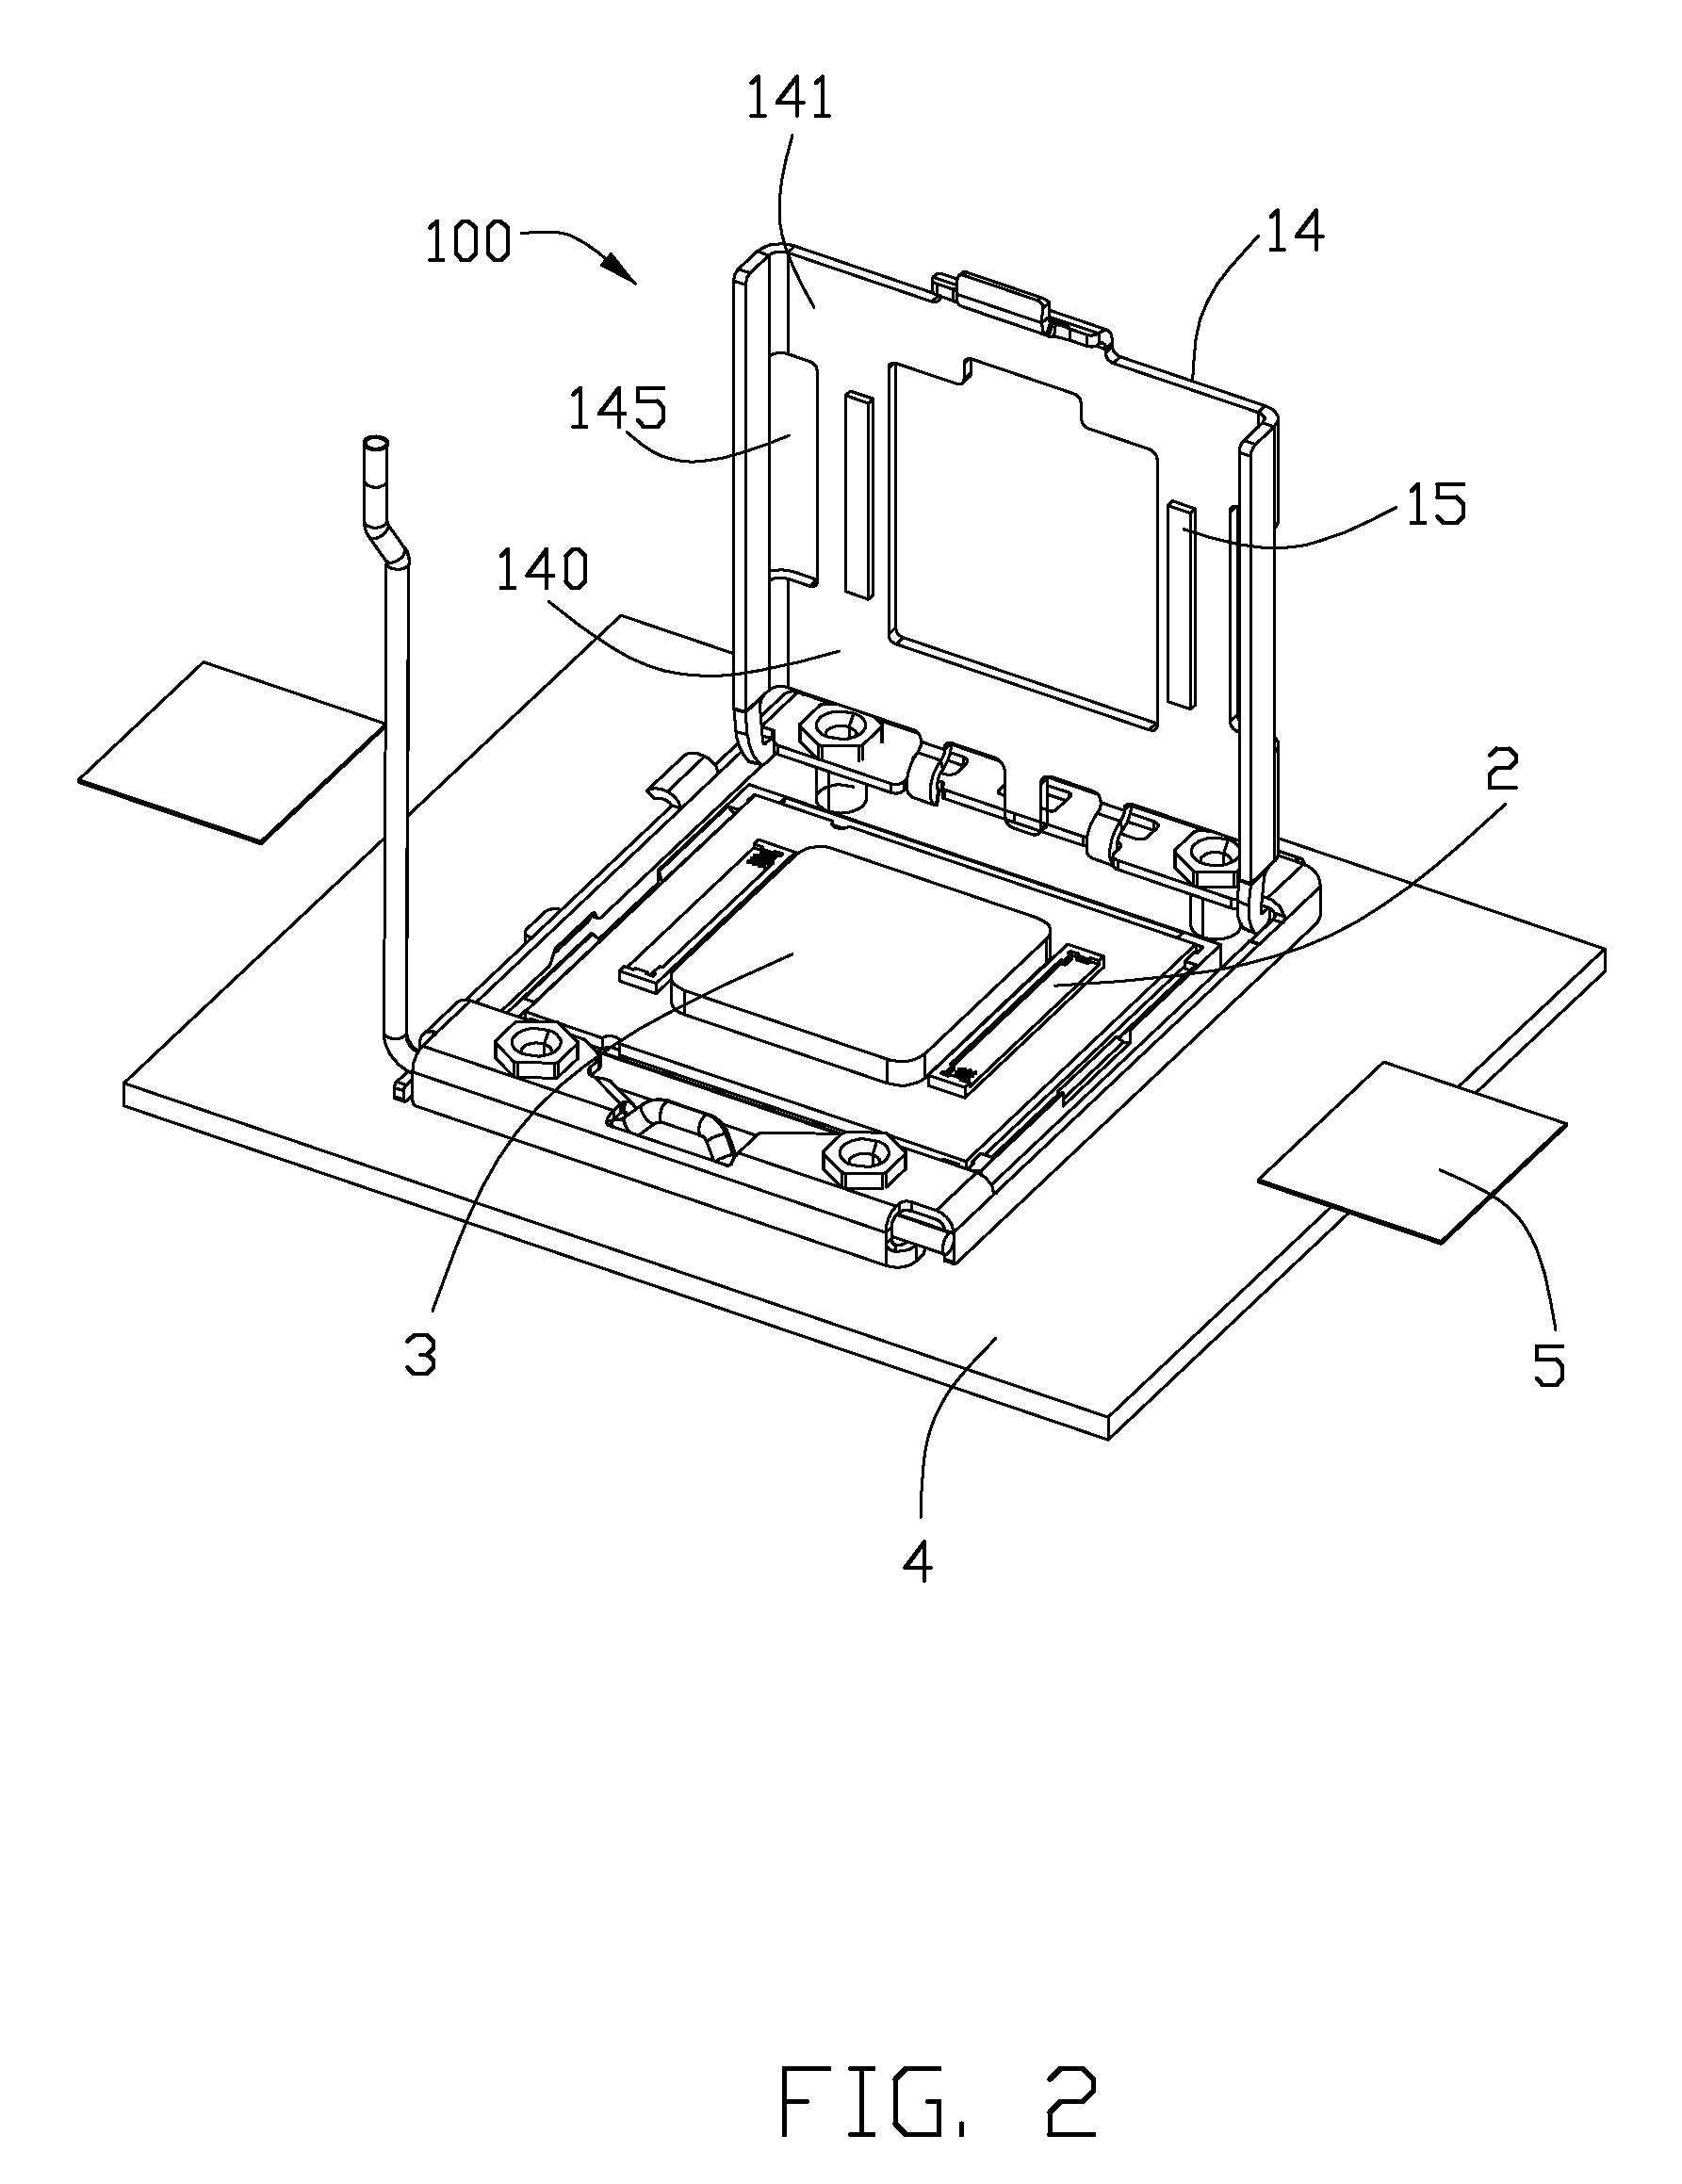 Independent loading mechanism facilitating interconnections for both CPU and flexible printed cable